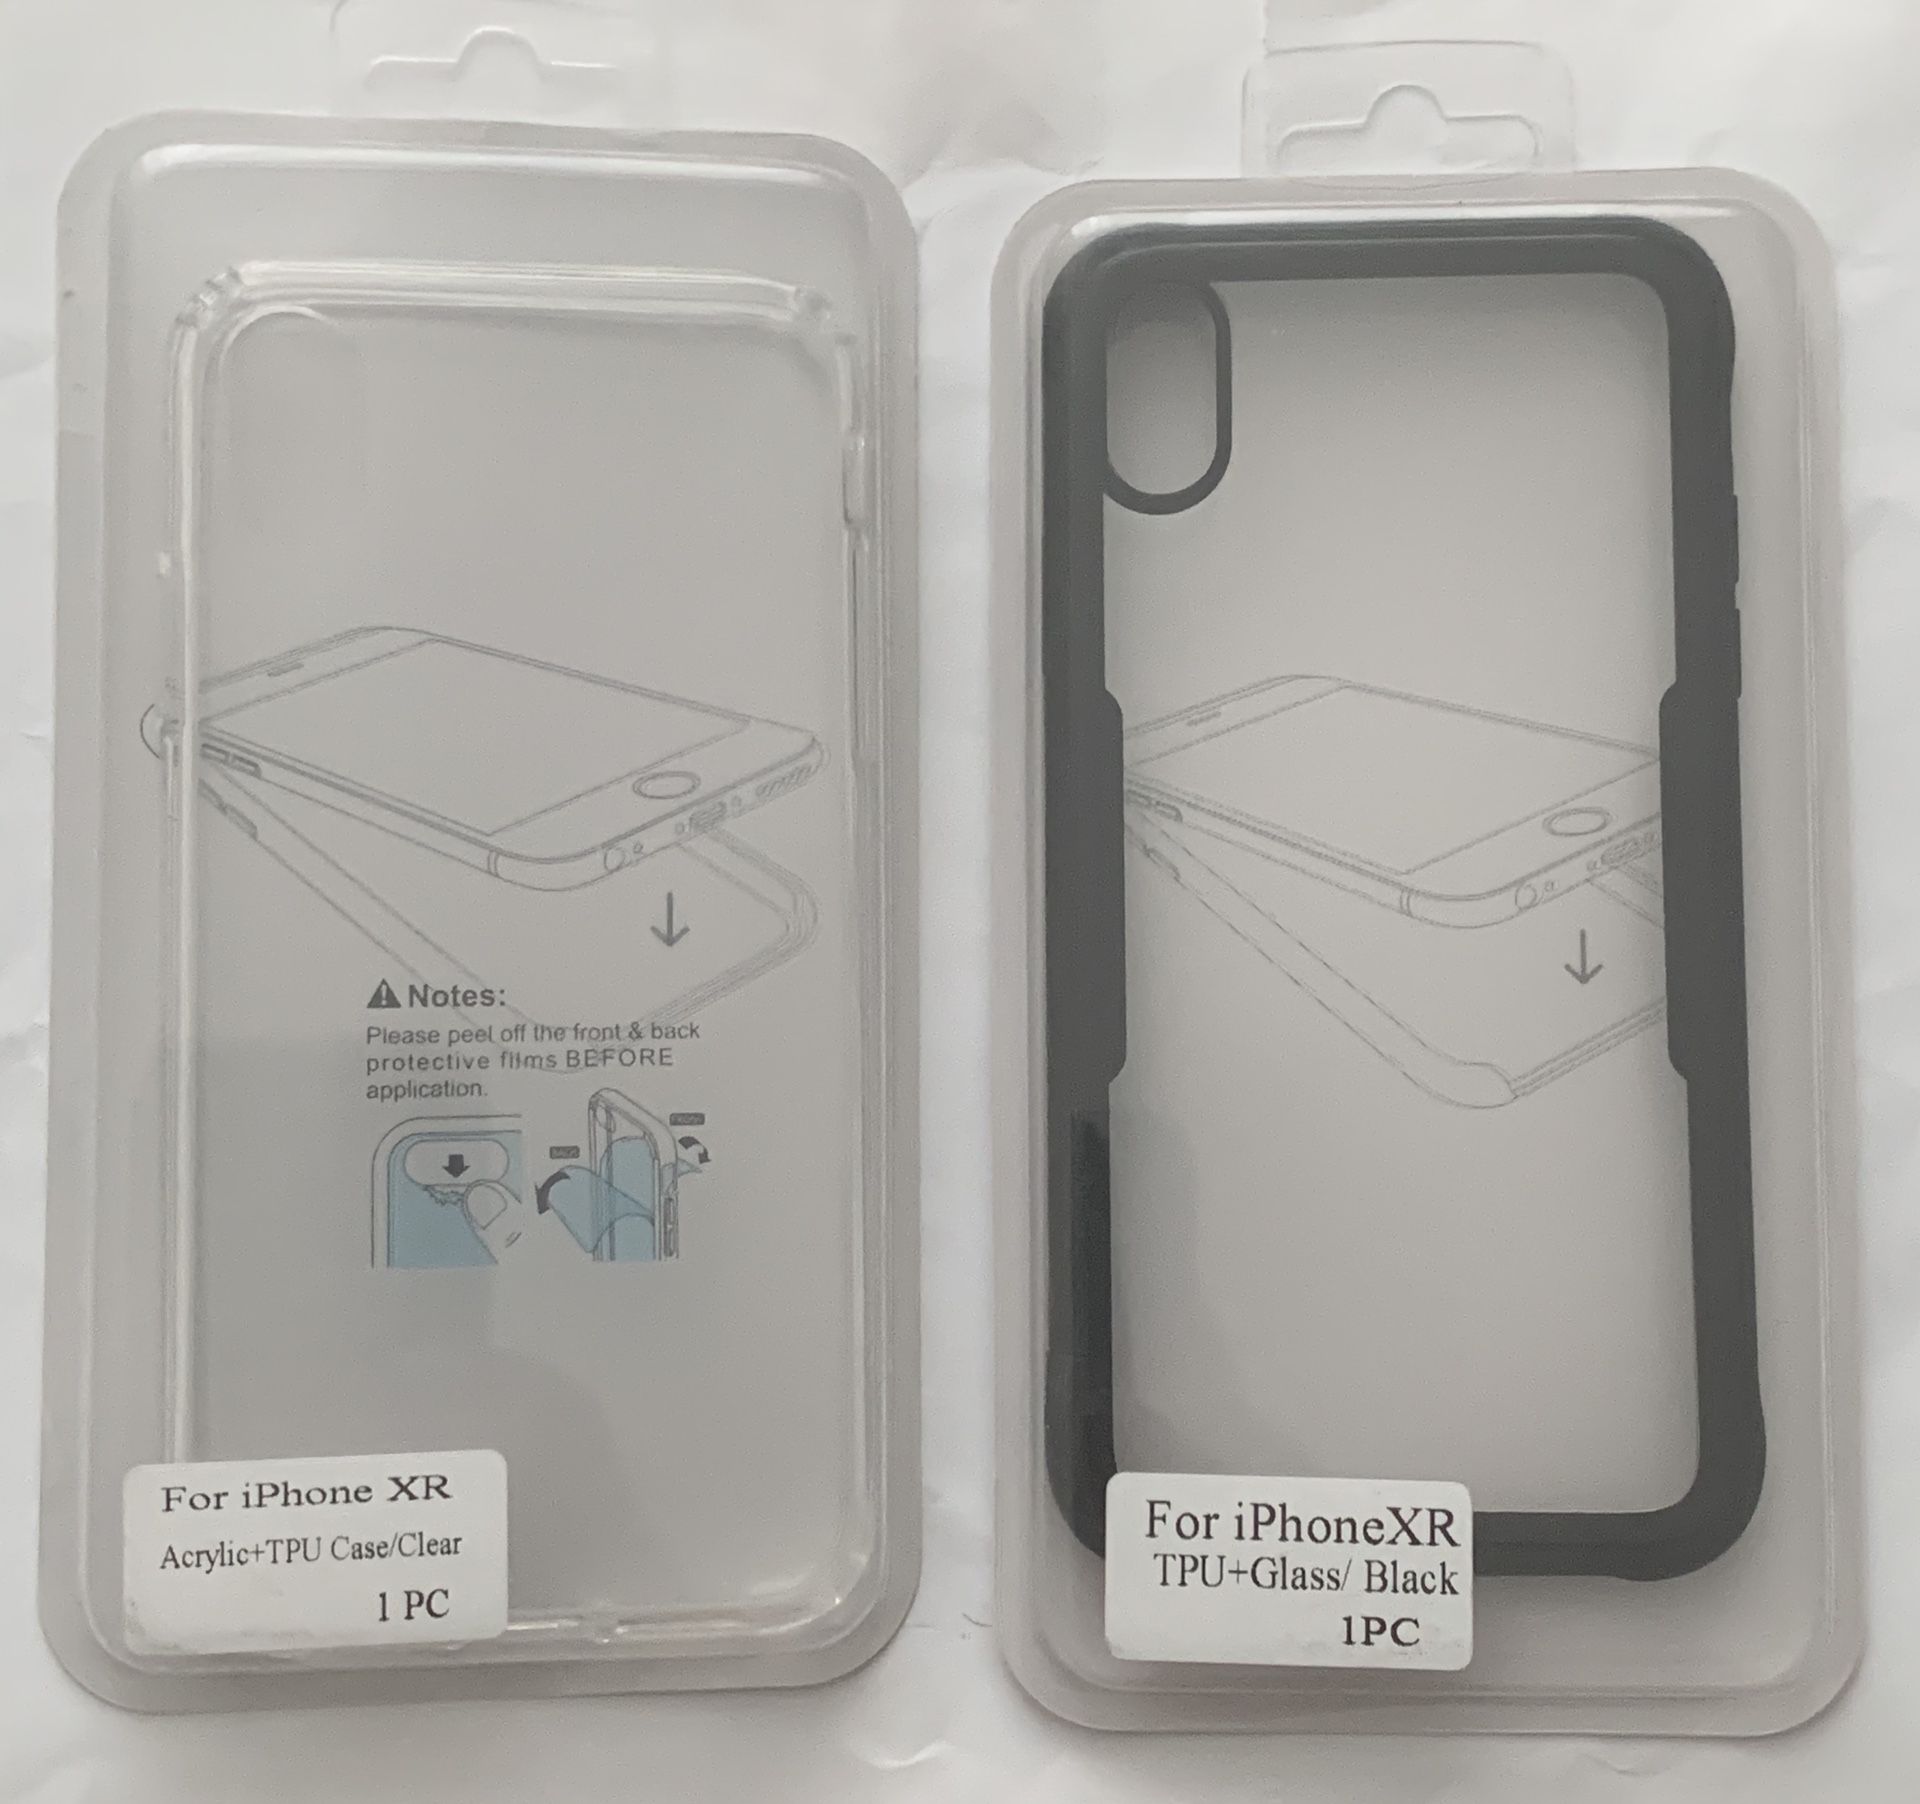 iPhone XR & XS Max Cases